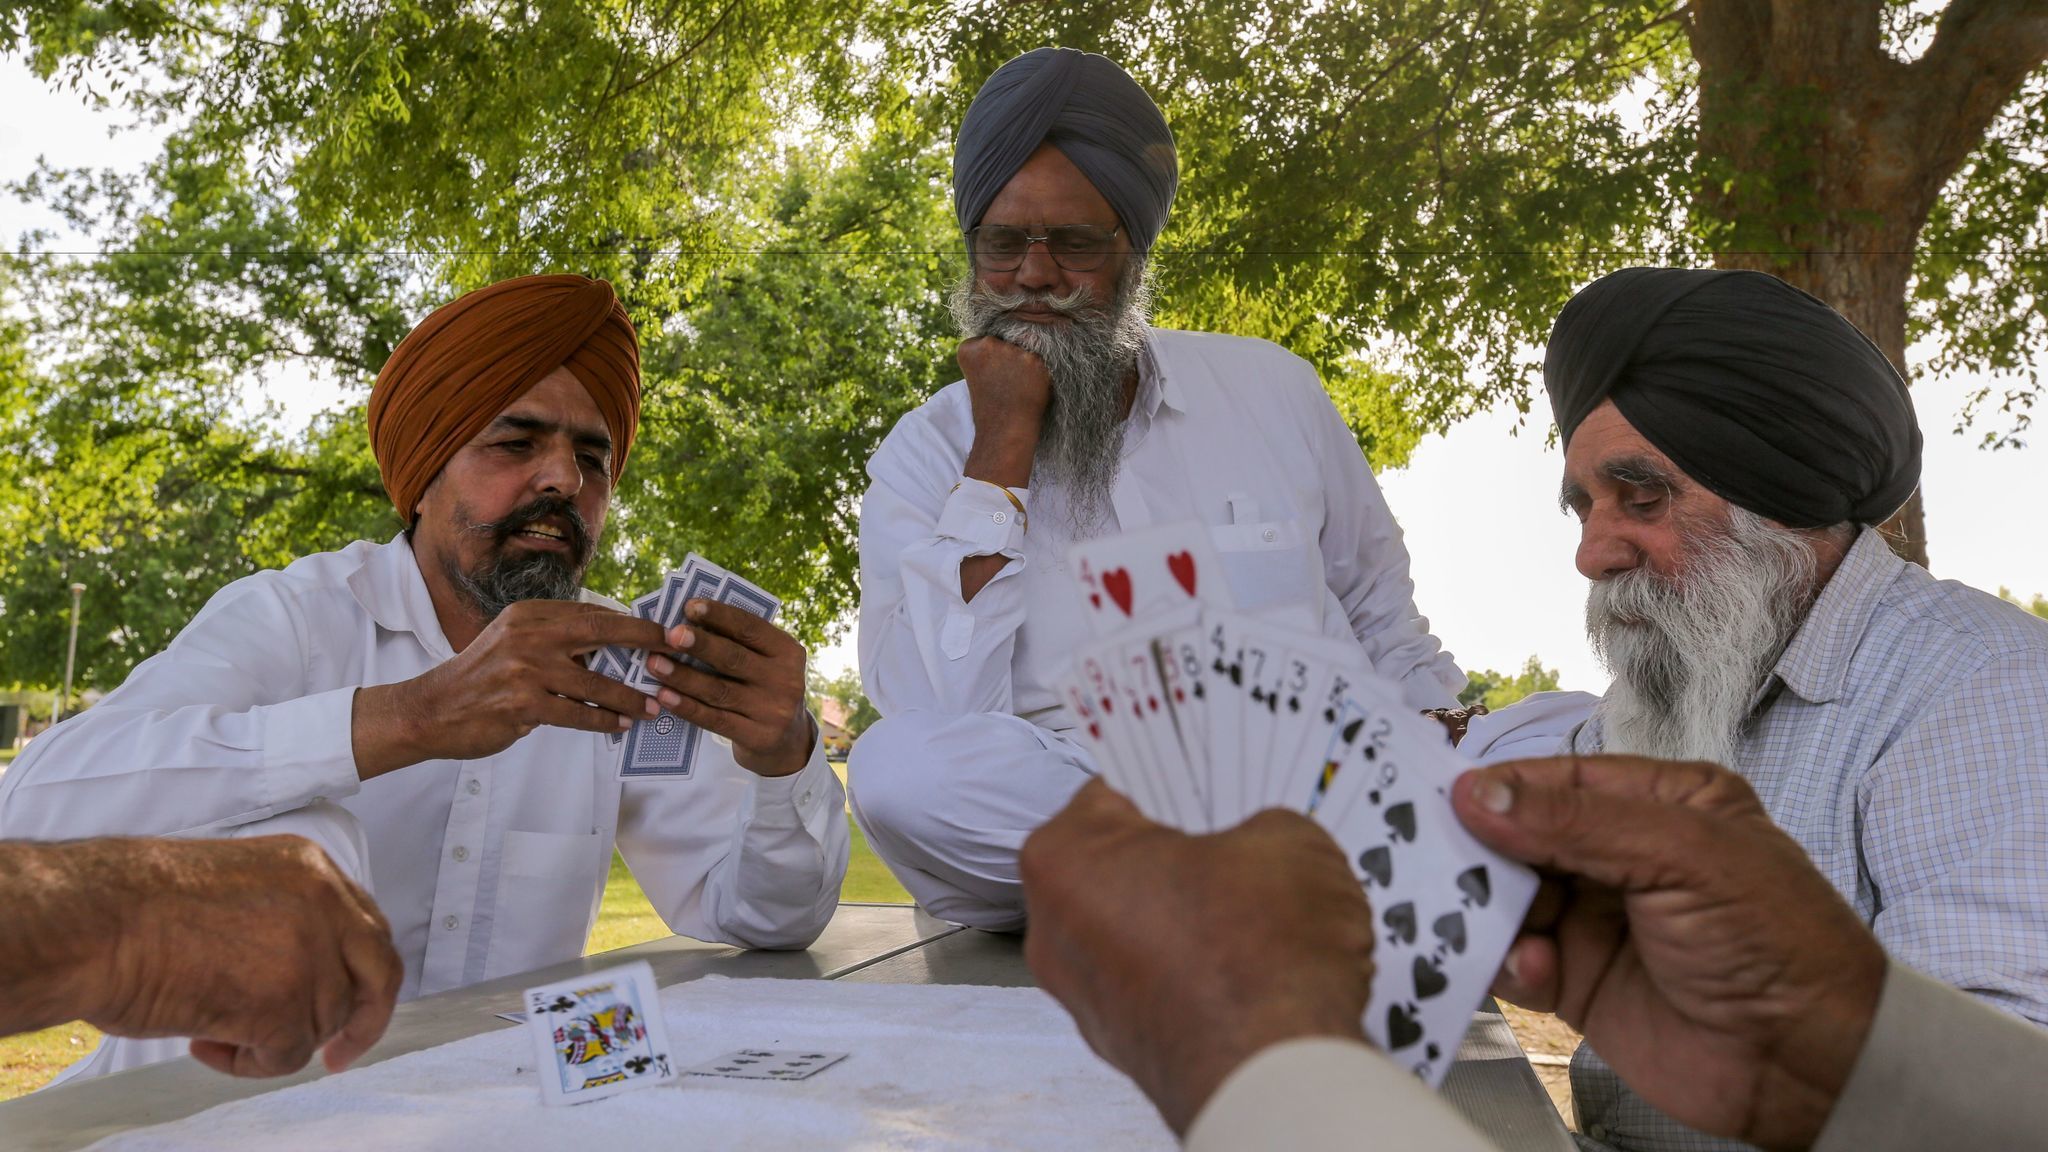 Sikh men play a card game in a neighborhood park in Bakersfield.